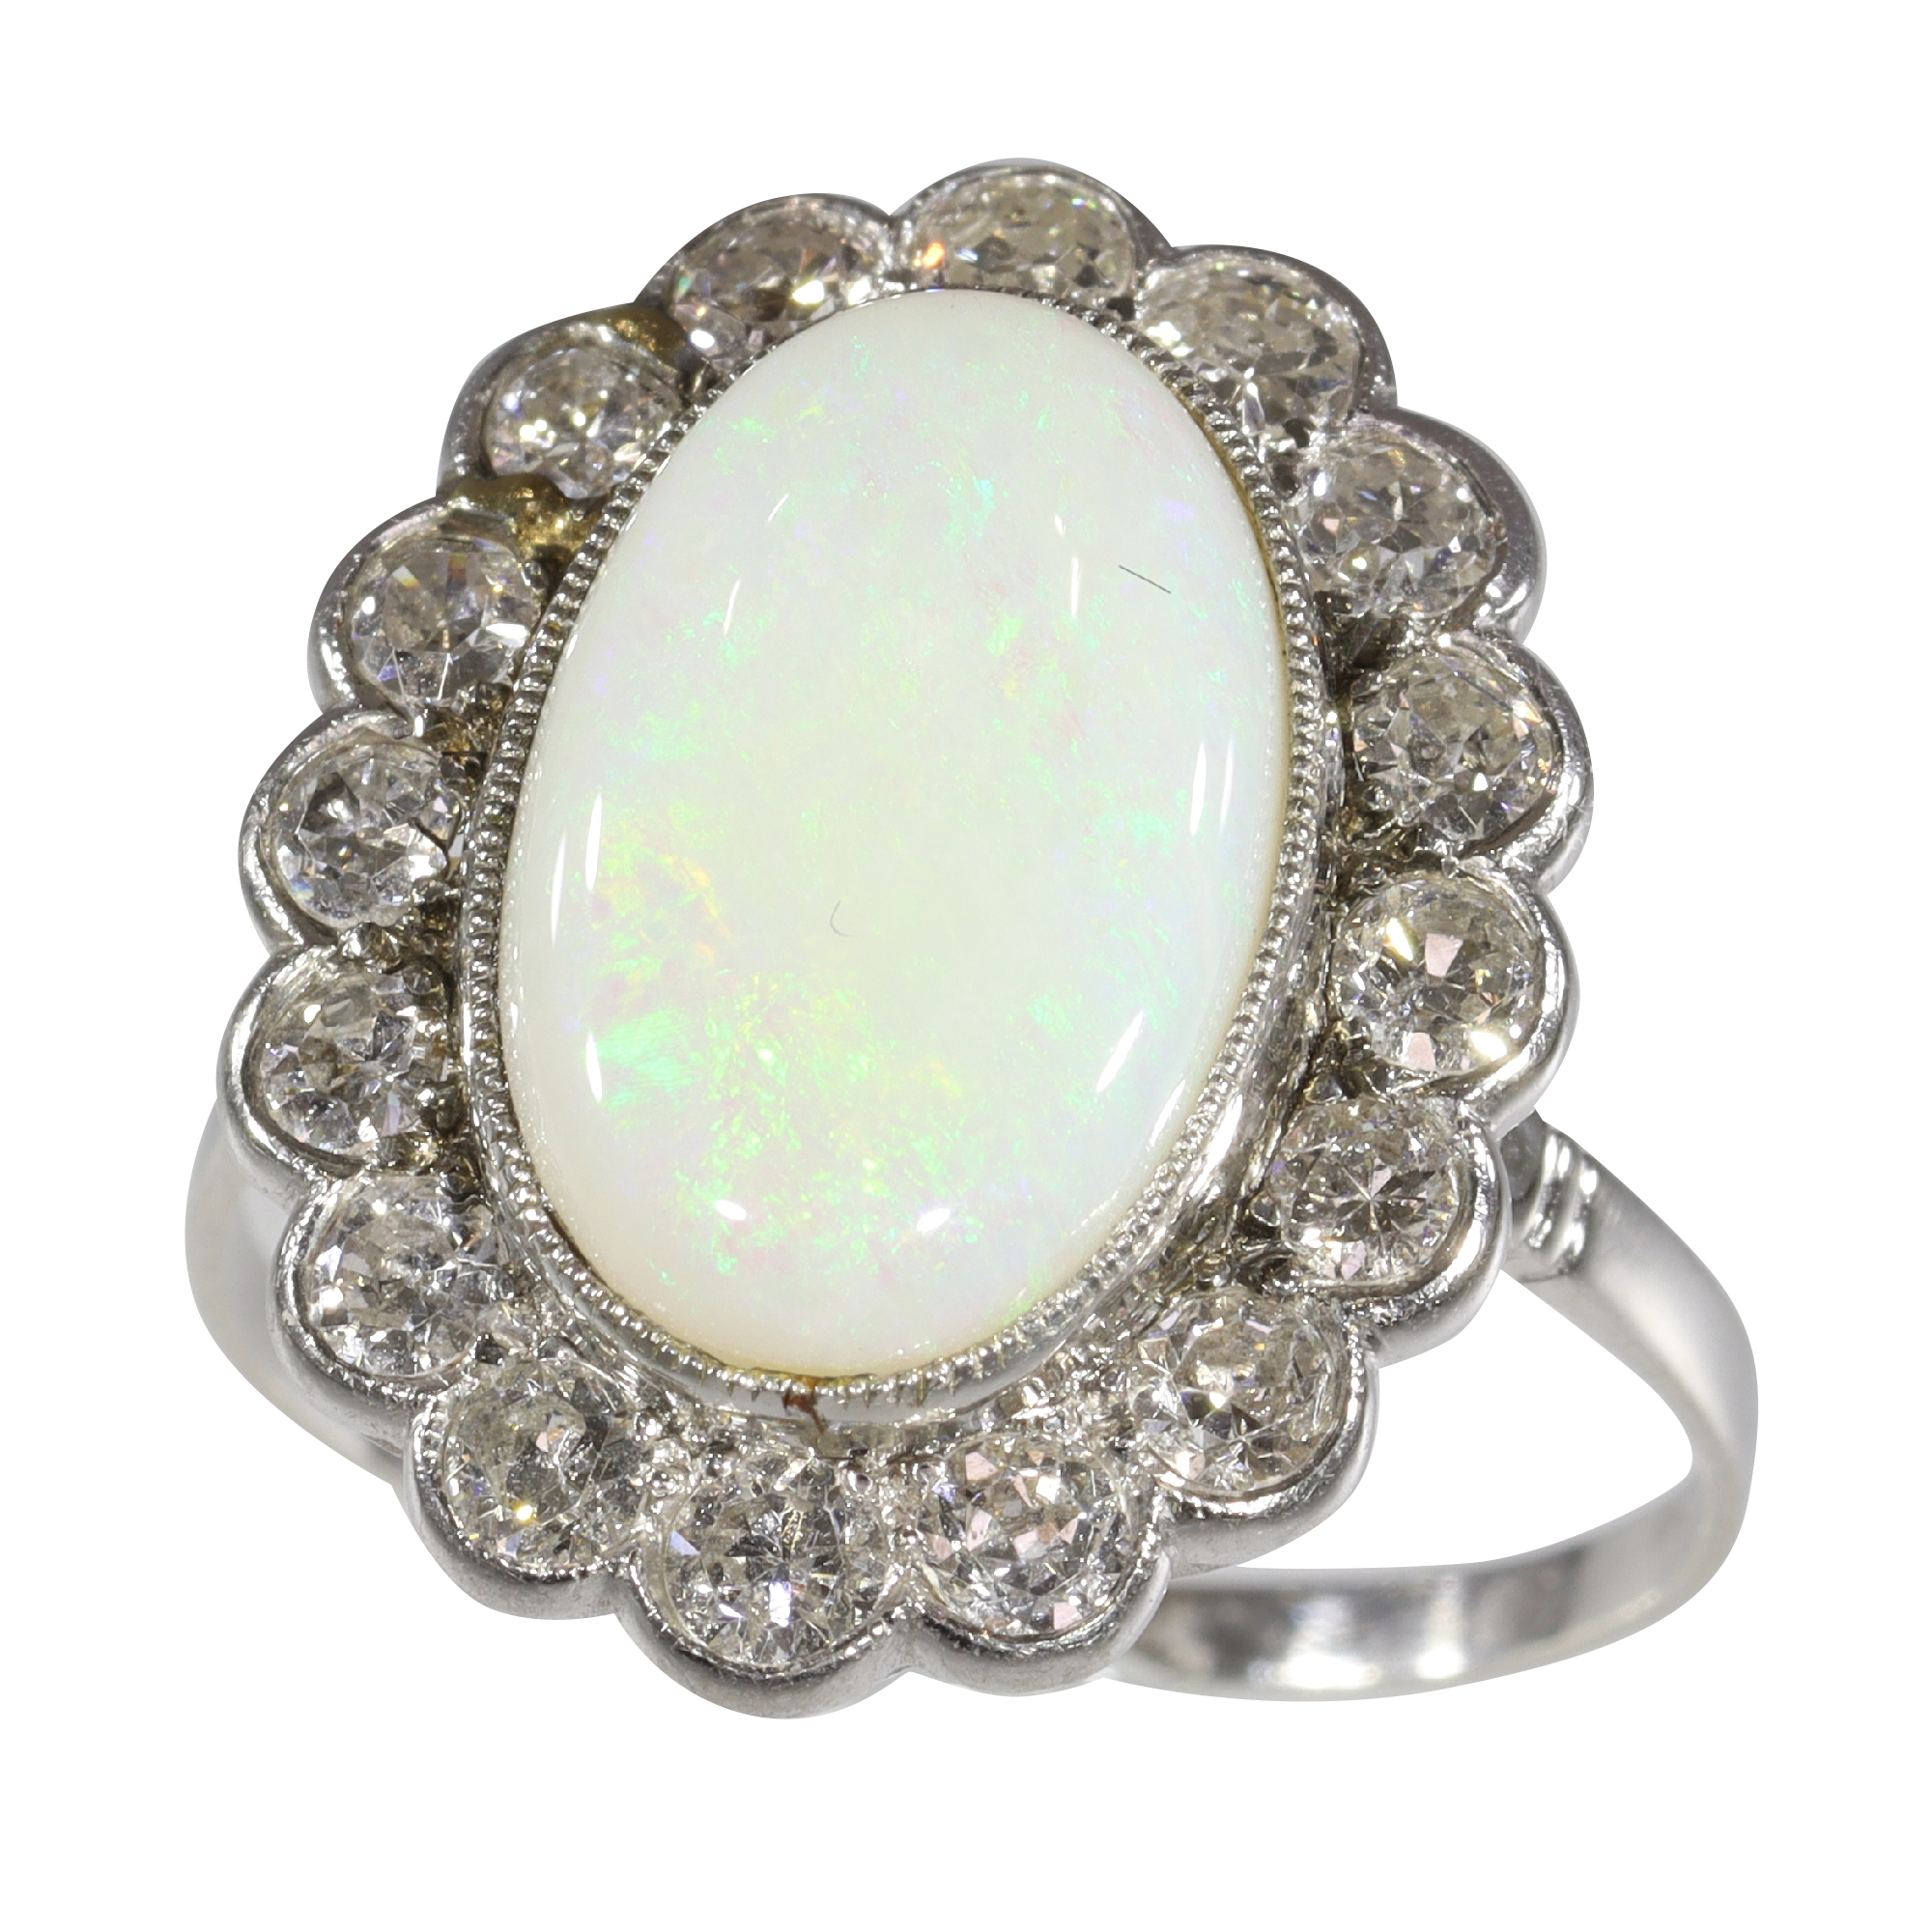 Classic Elegance: The Timeless Appeal of a Vintage 1950s Opal Ring